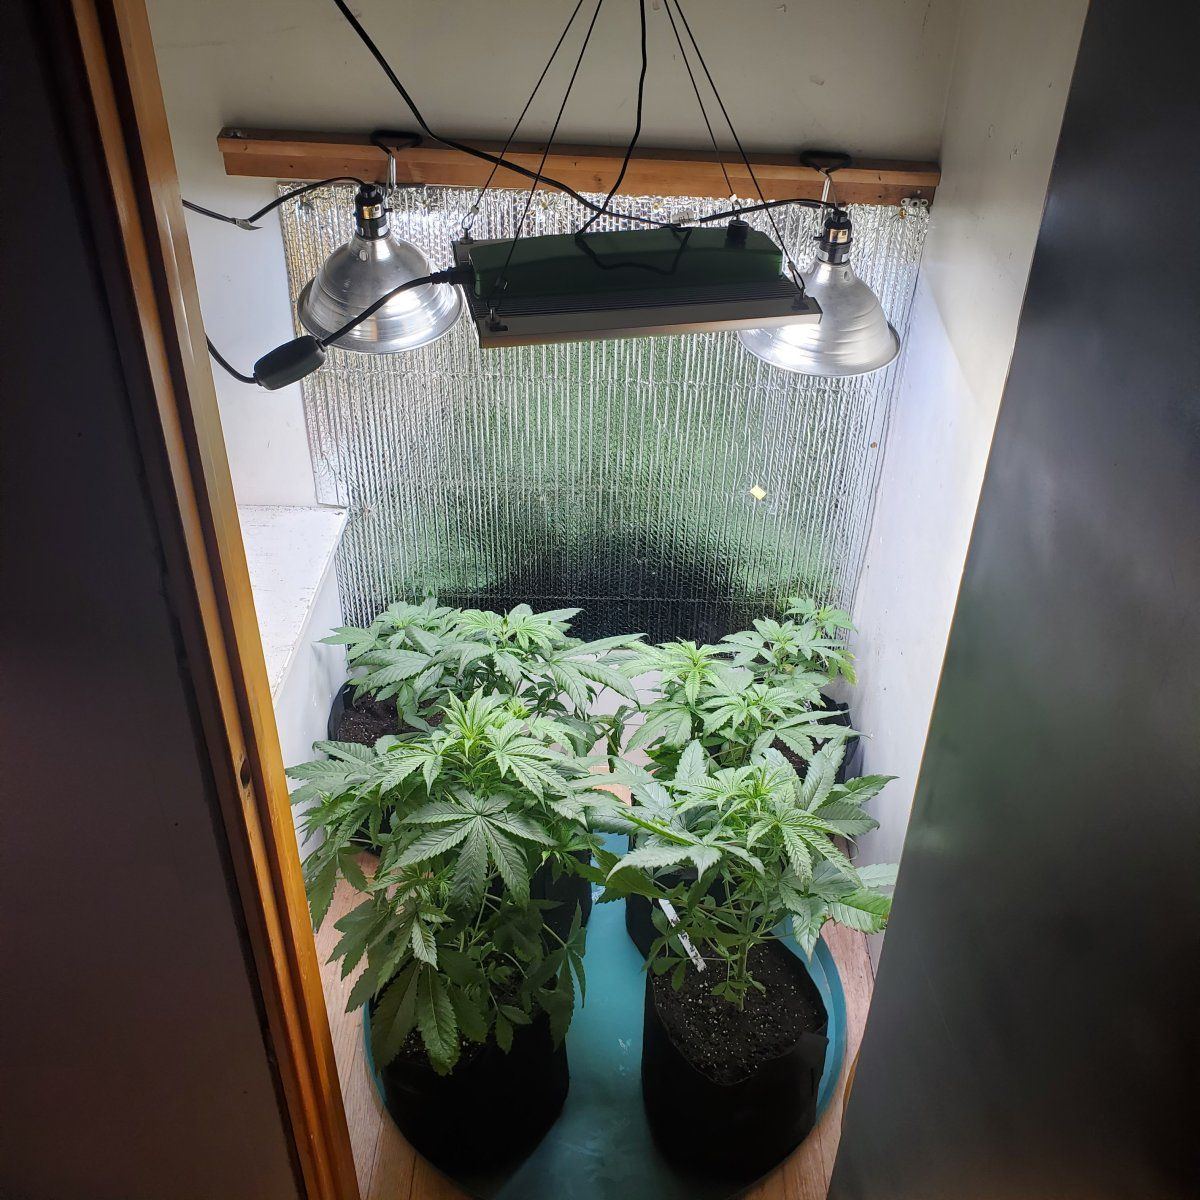 New herewould love advice on 1st indoor growpics  specifics in post